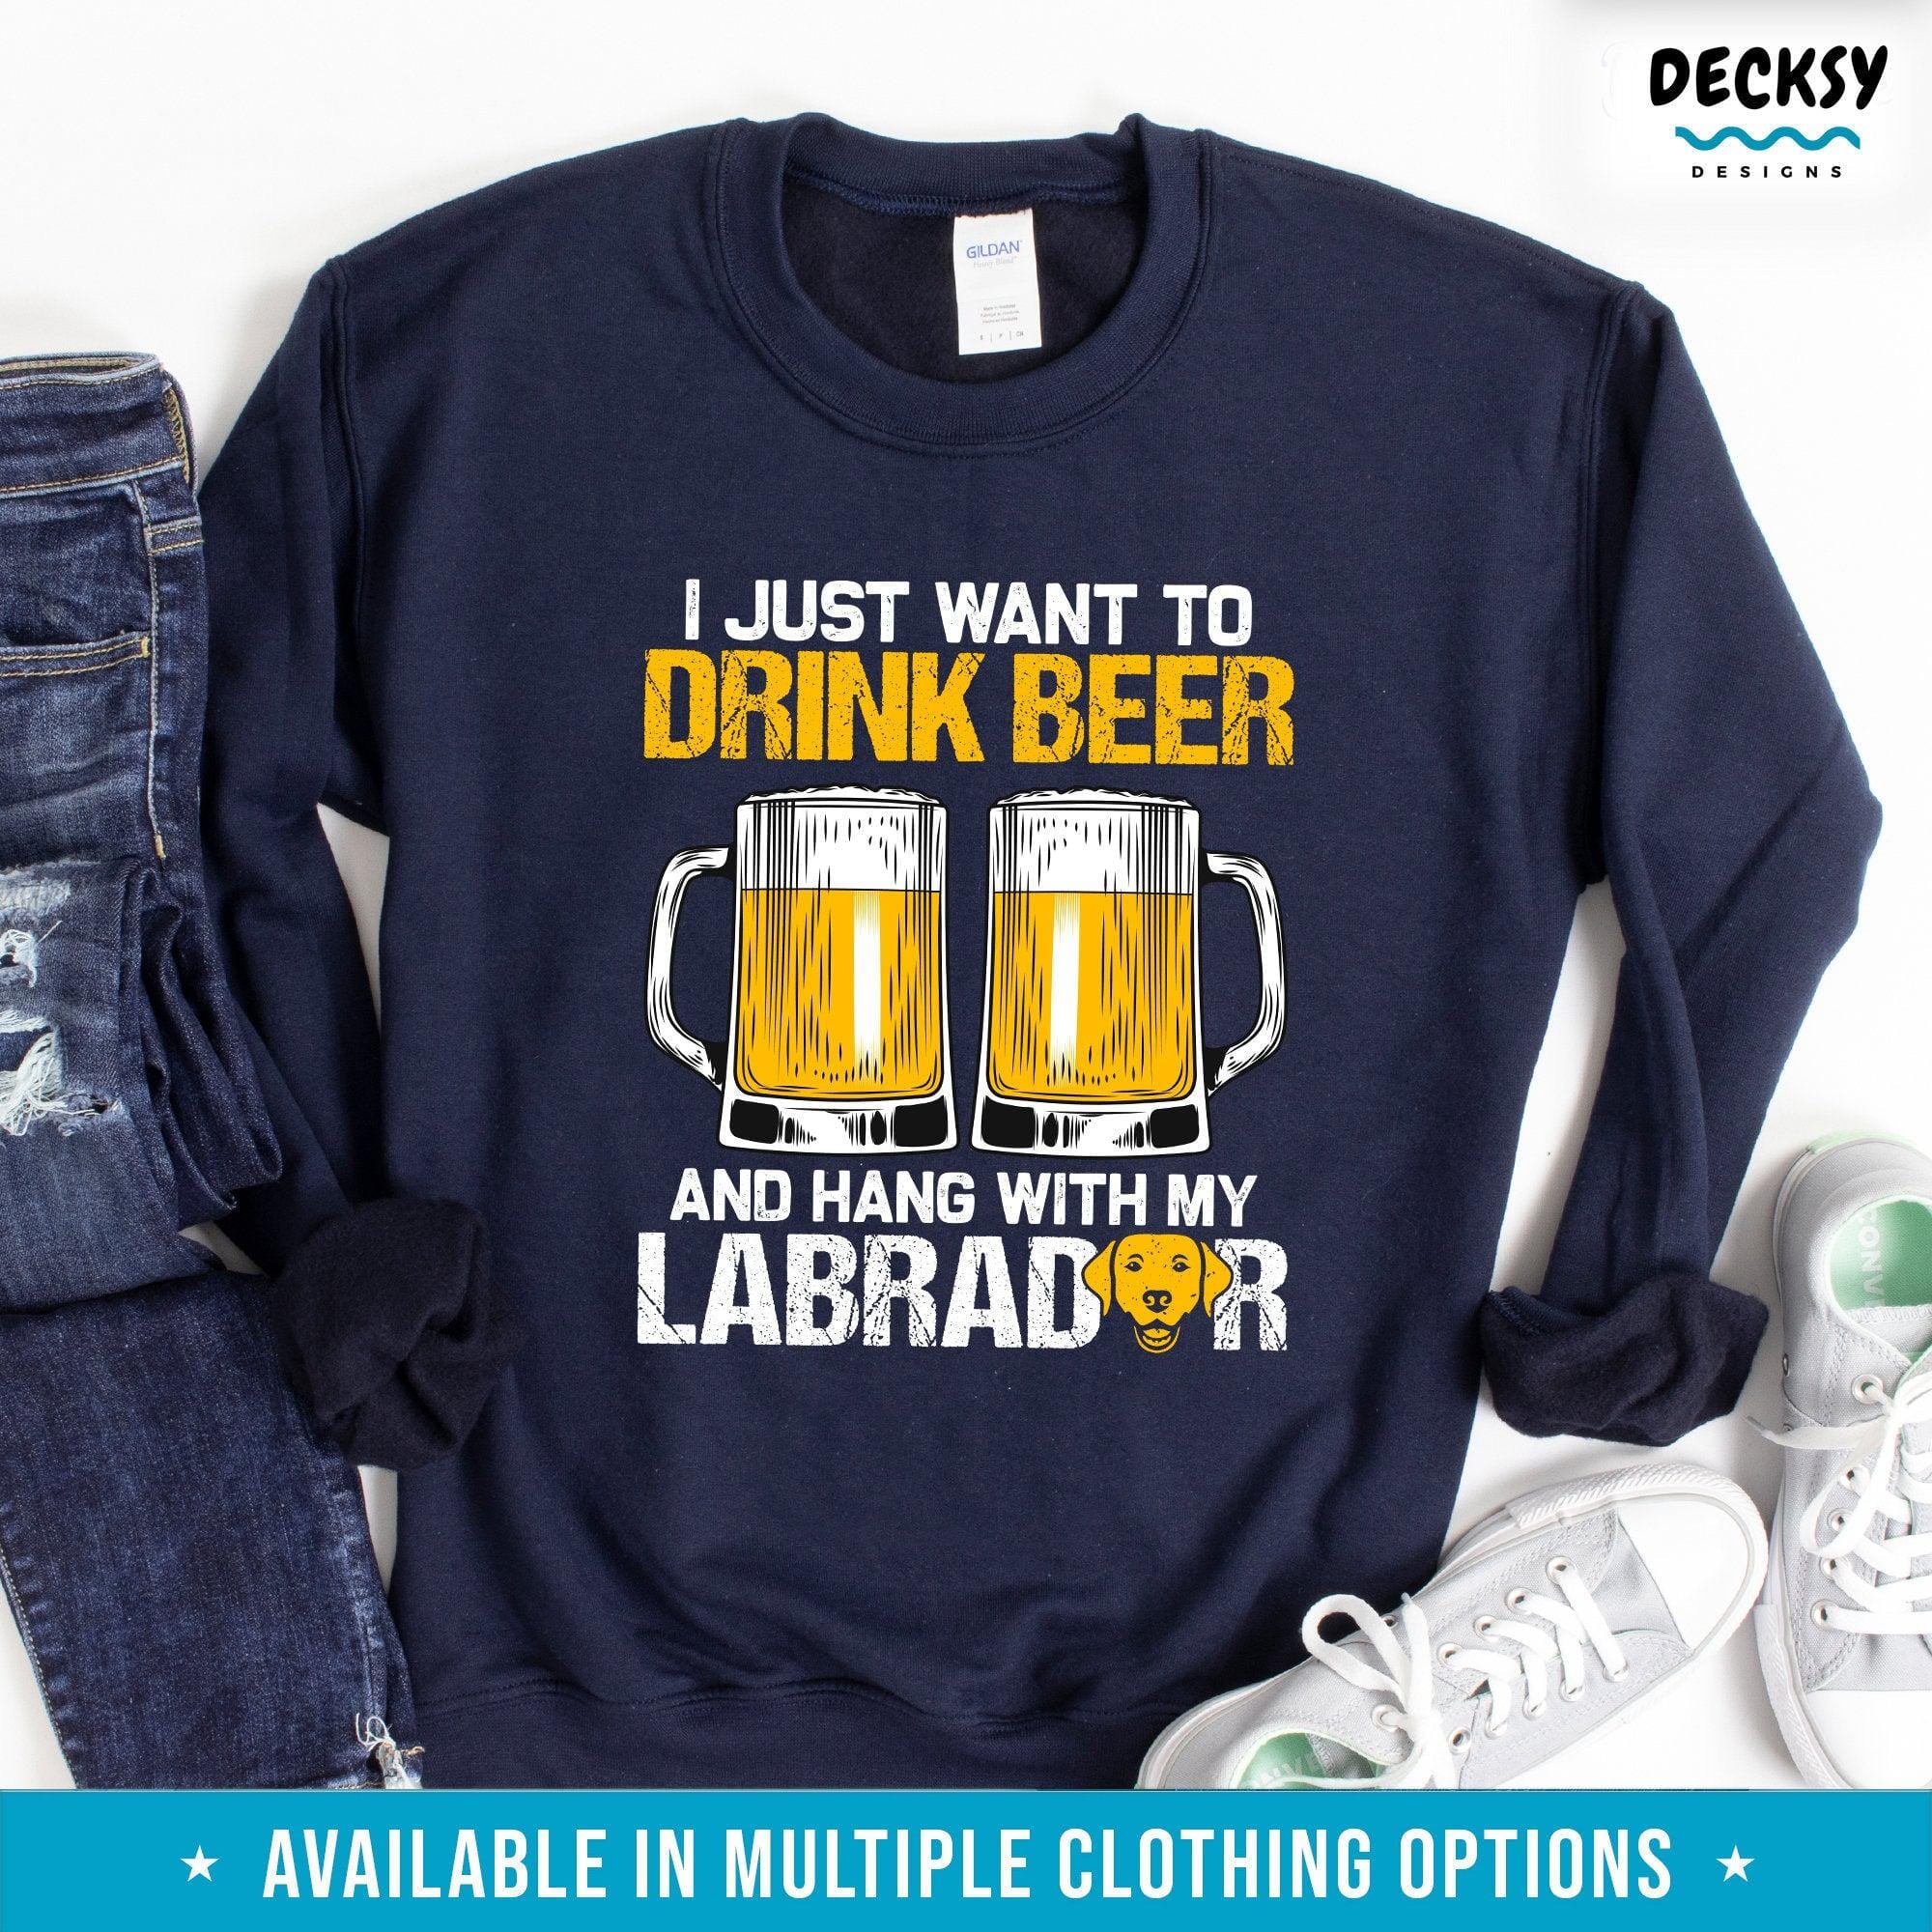 Funny Beer Drinking Shirt, Labrador Owner Gift-Clothing:Gender-Neutral Adult Clothing:Tops & Tees:T-shirts:Graphic Tees-DecksyDesigns